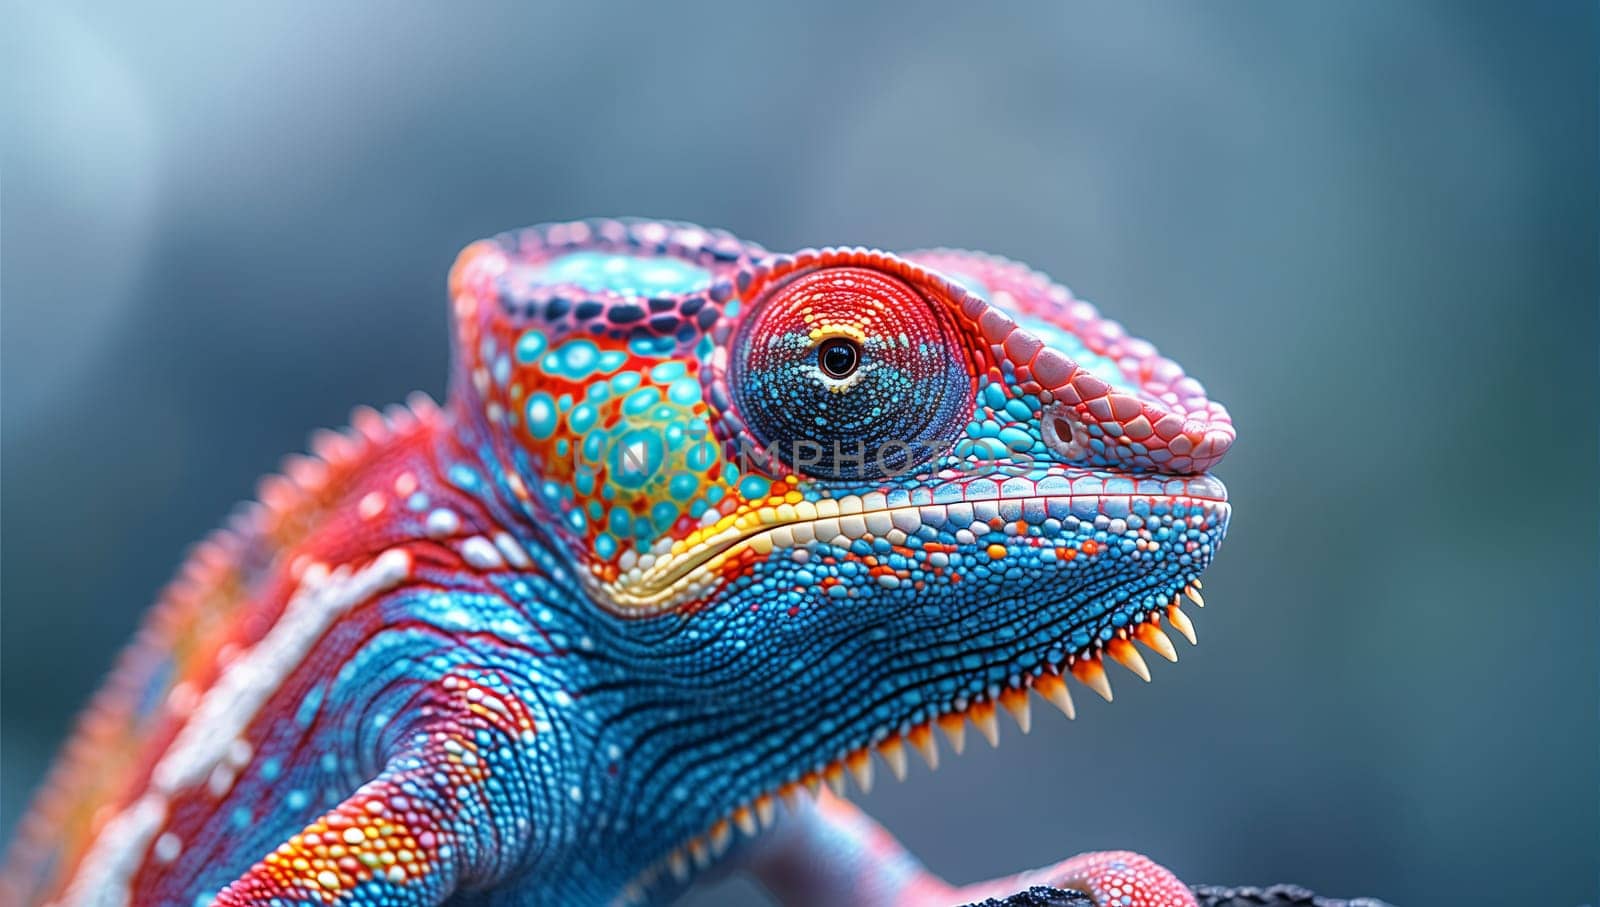 An electric blue chameleon, a scaled reptile, is perched on a terrestrial plant branch, gazing into the camera in stunning macro photography